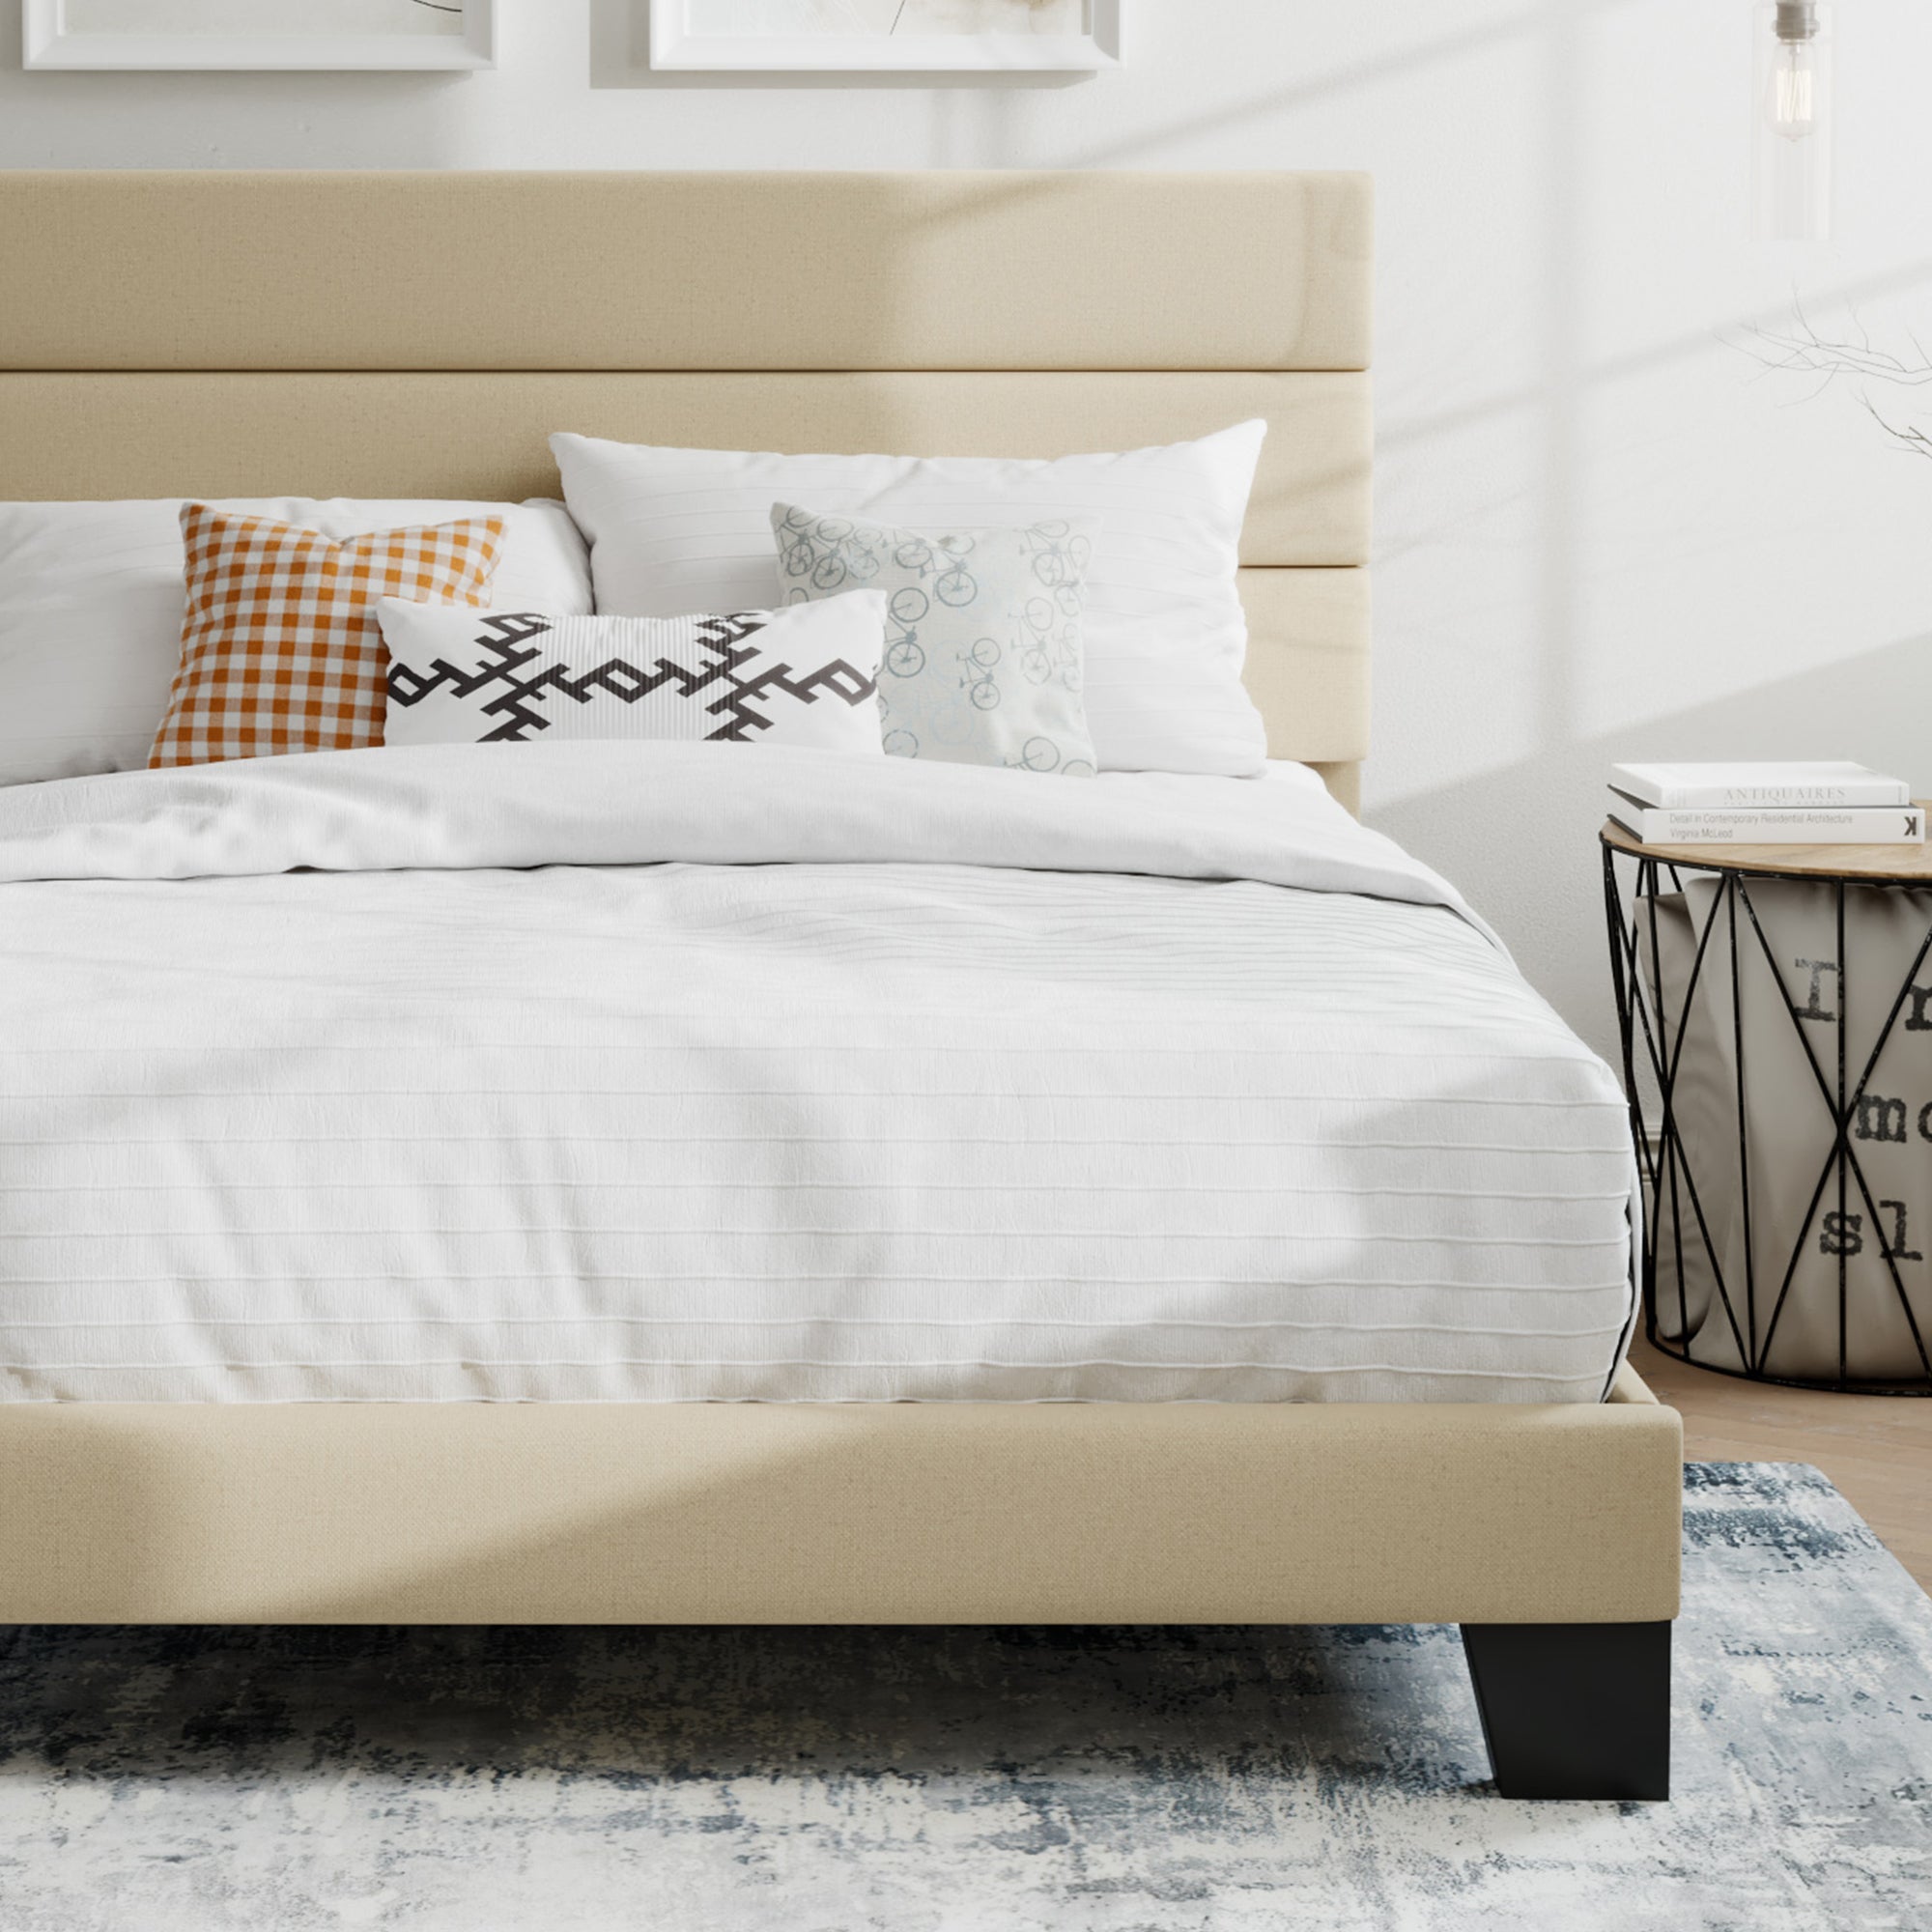 Platform Upholstered Bed, Fabric Bed Frame with Headboard and Wooden Slats